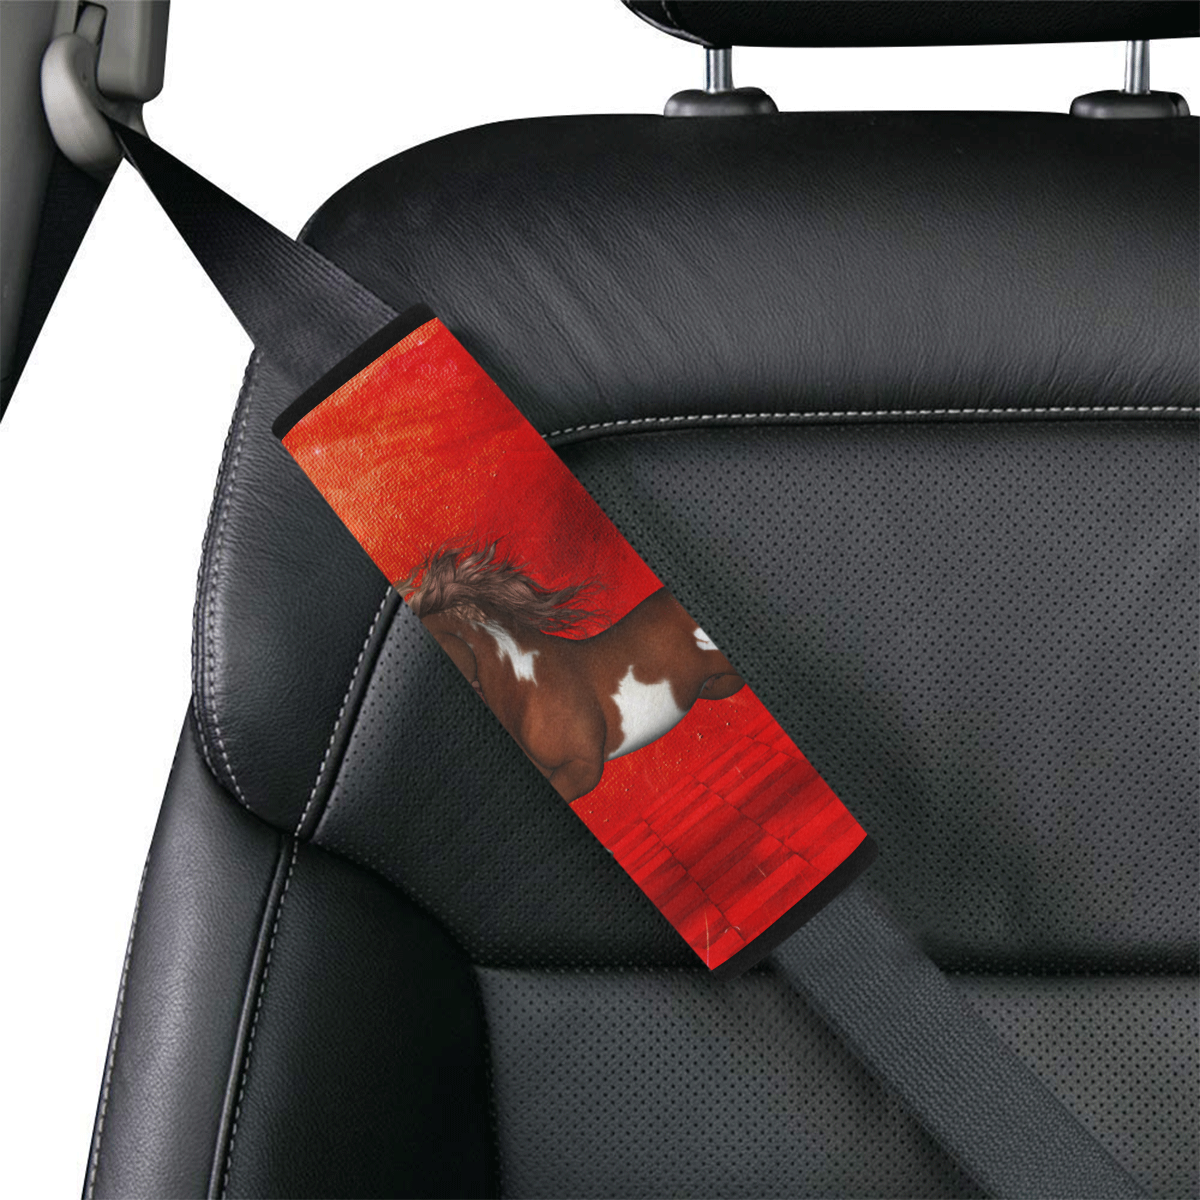 Wild horse on red background Car Seat Belt Cover 7''x8.5''